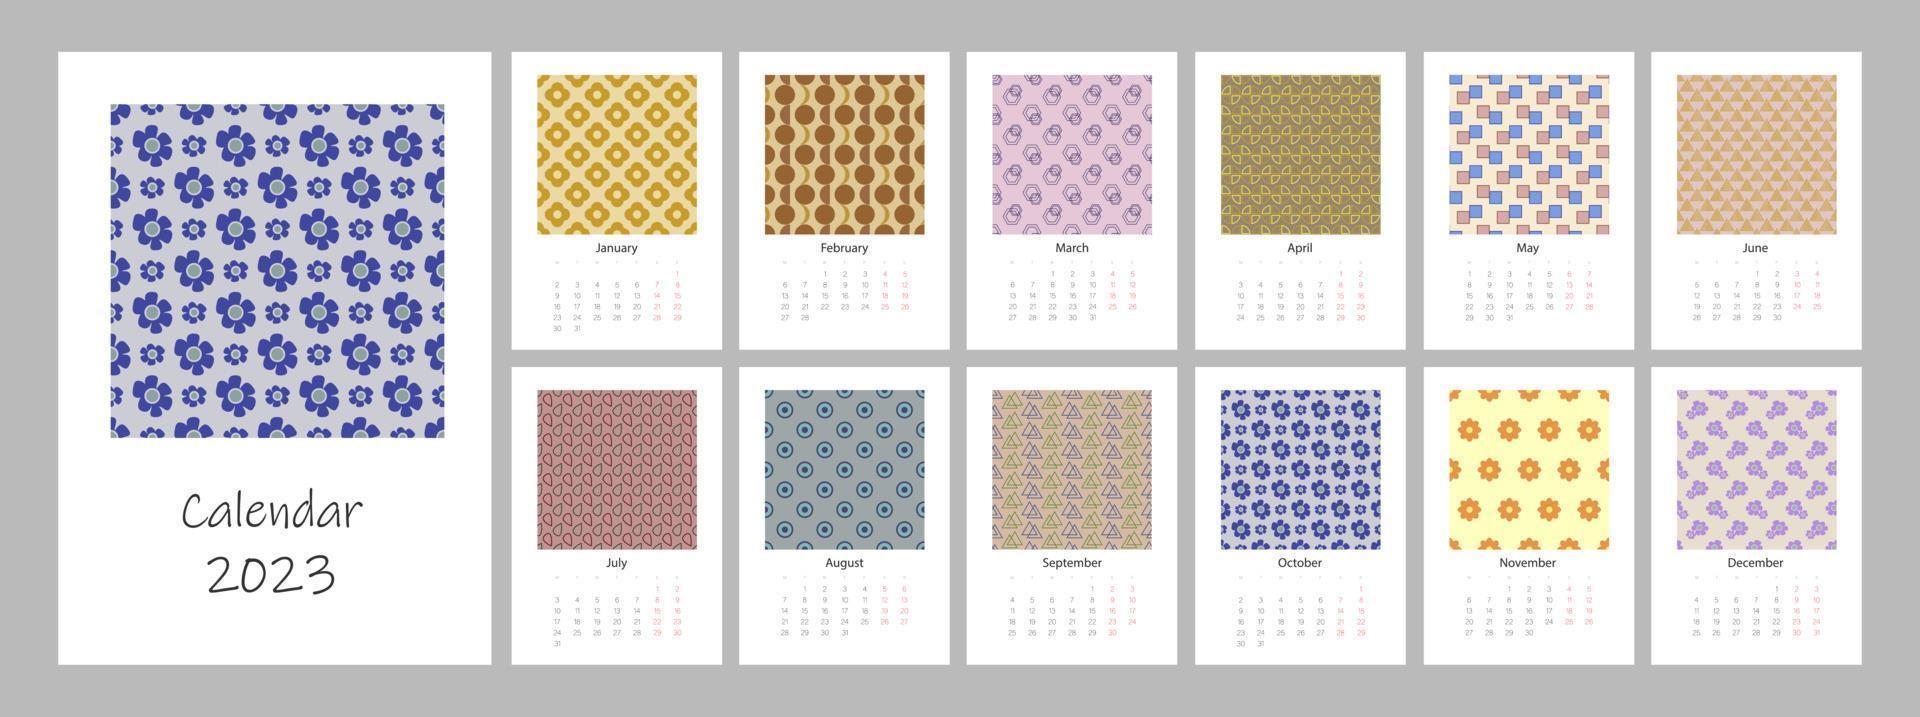 Calendar 2023 year template. Vertical design with geometric print. Editable illustration page template A4, A3, set of 12 months with cover. Vector mesh. Week starts on Monday.